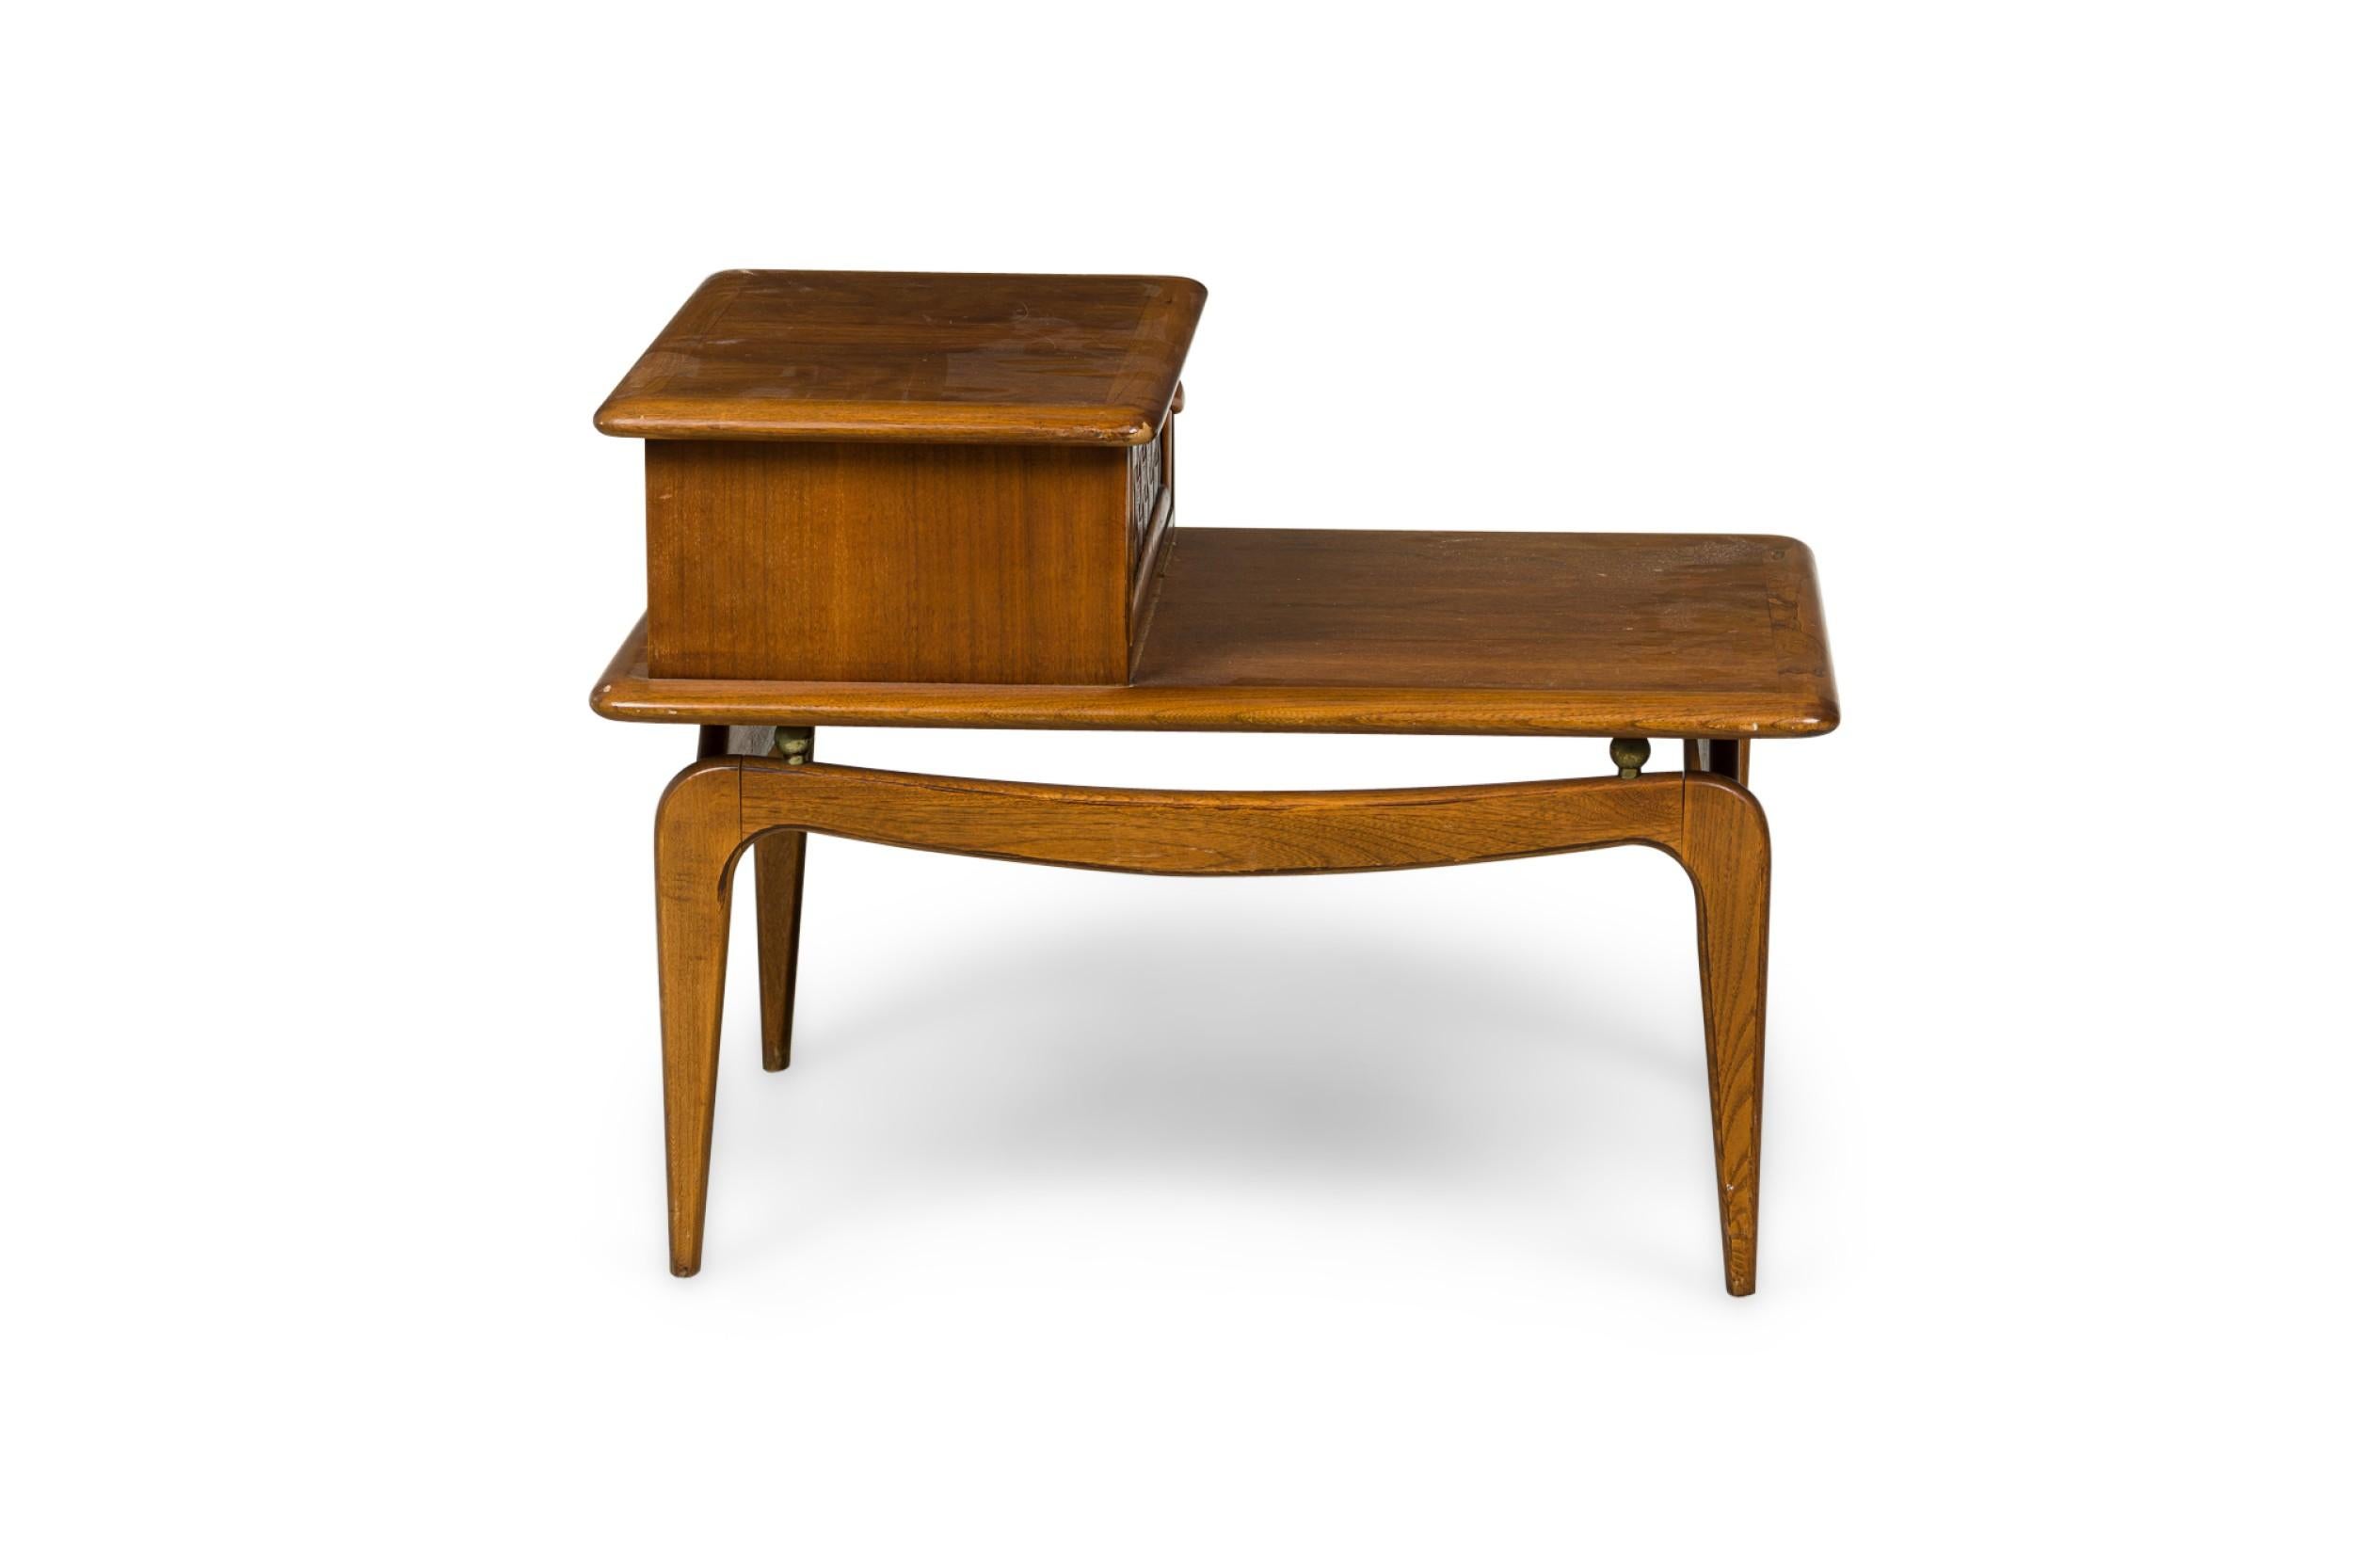 PAIR of Mid-Century American Modern (1950s) walnut 2-tier nightstands / end tables composed of a table frame with boxed cabinet and woven inlay pullout drawer, with 4 brass ball supports on curved scissor legs. (LANE ALTAVISTA) (PRICED AS PAIR)
 

